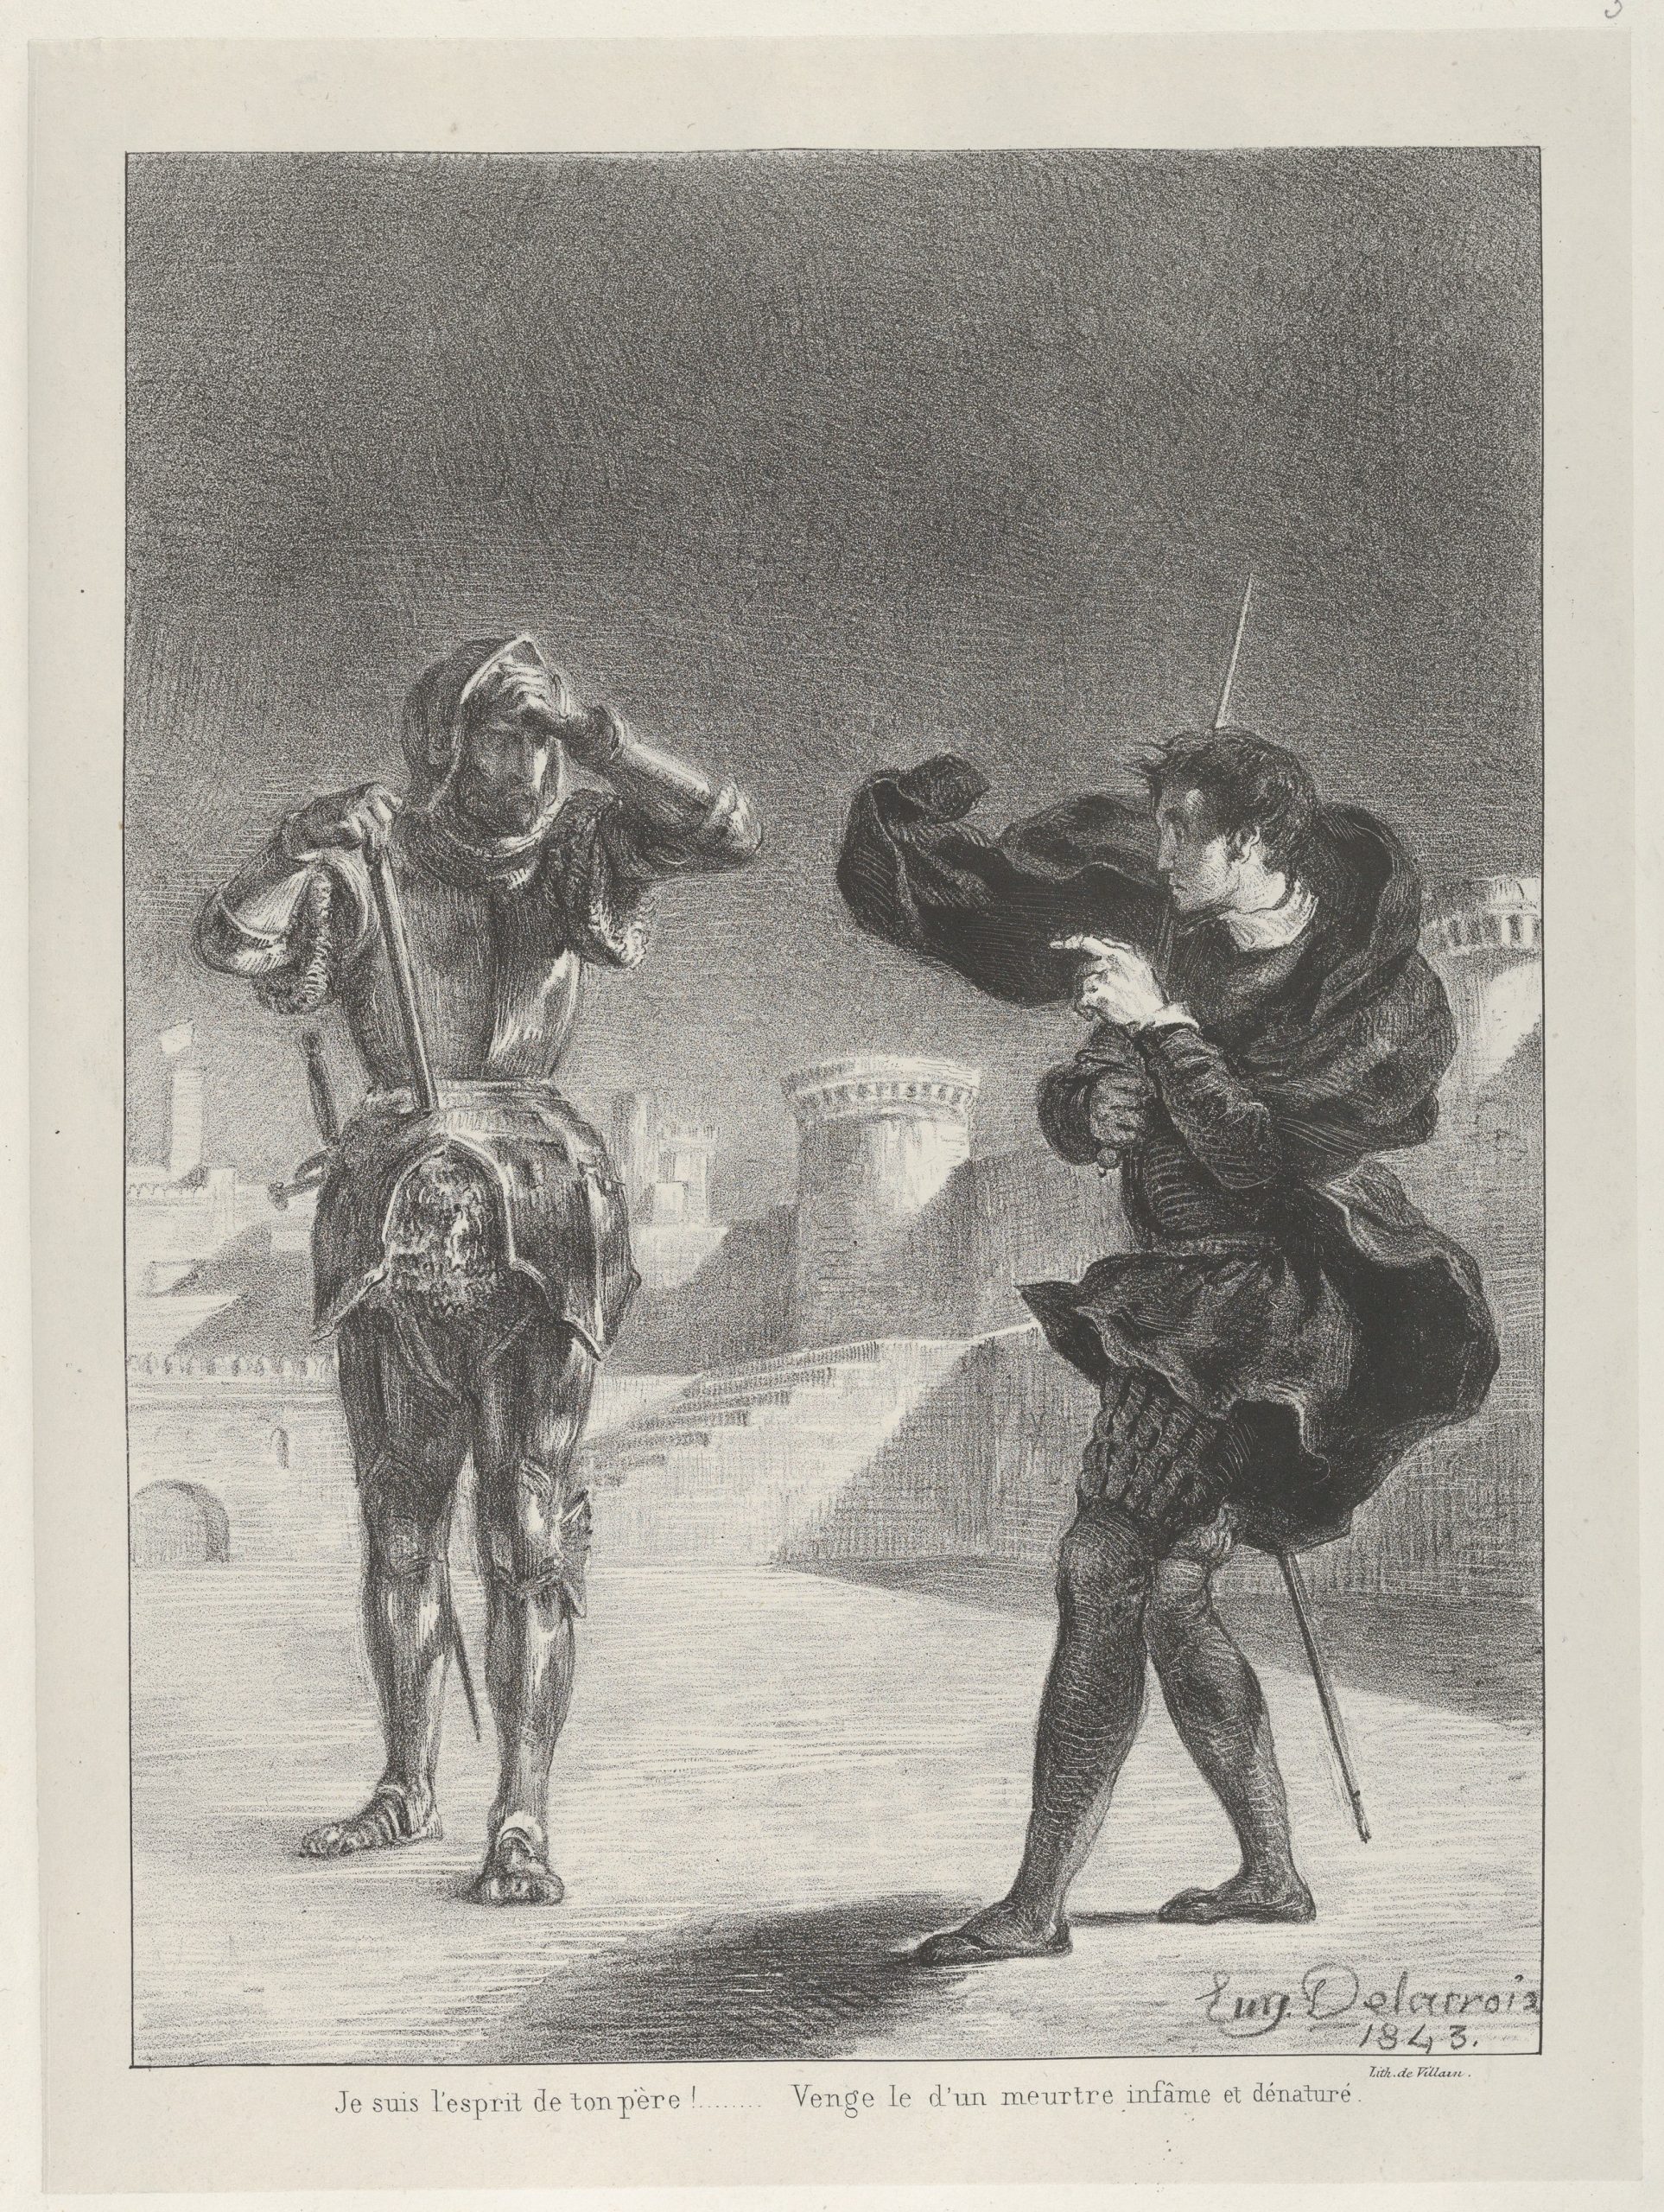 Two men dressed in armour stand facing each other in conversation beneath the sun's shadows.